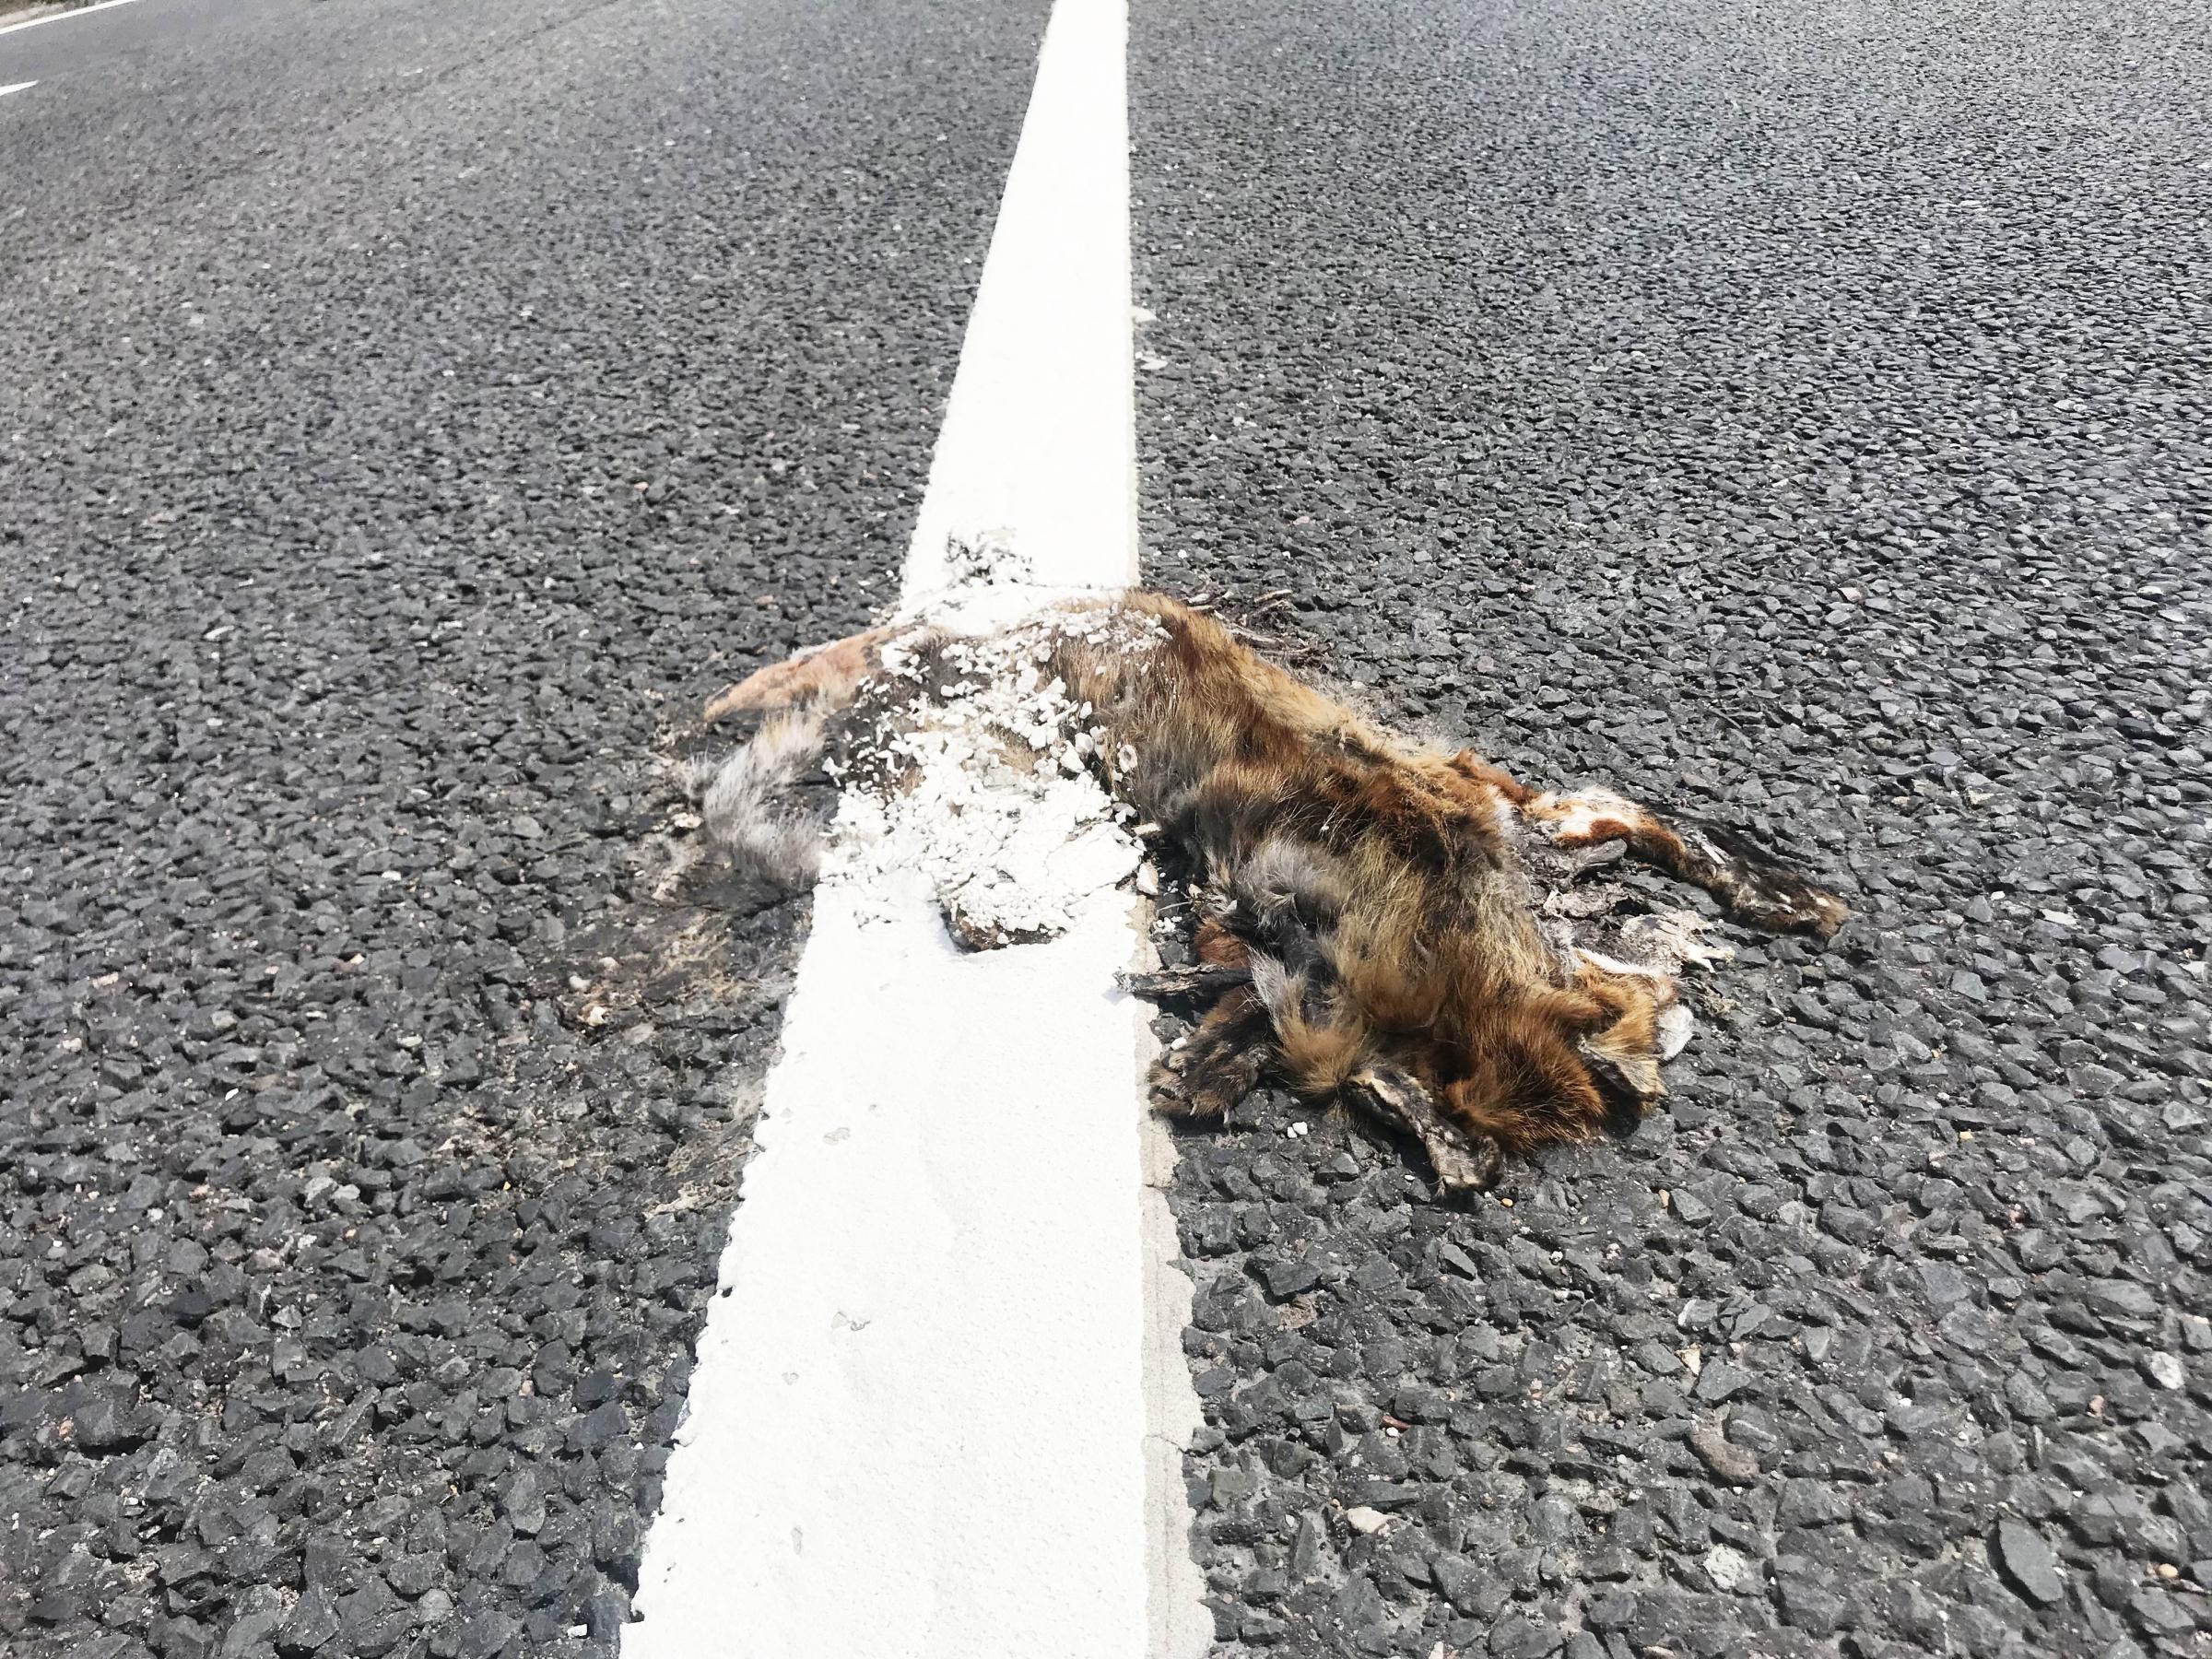 Council says sorry for painting white line over dead fox on A259